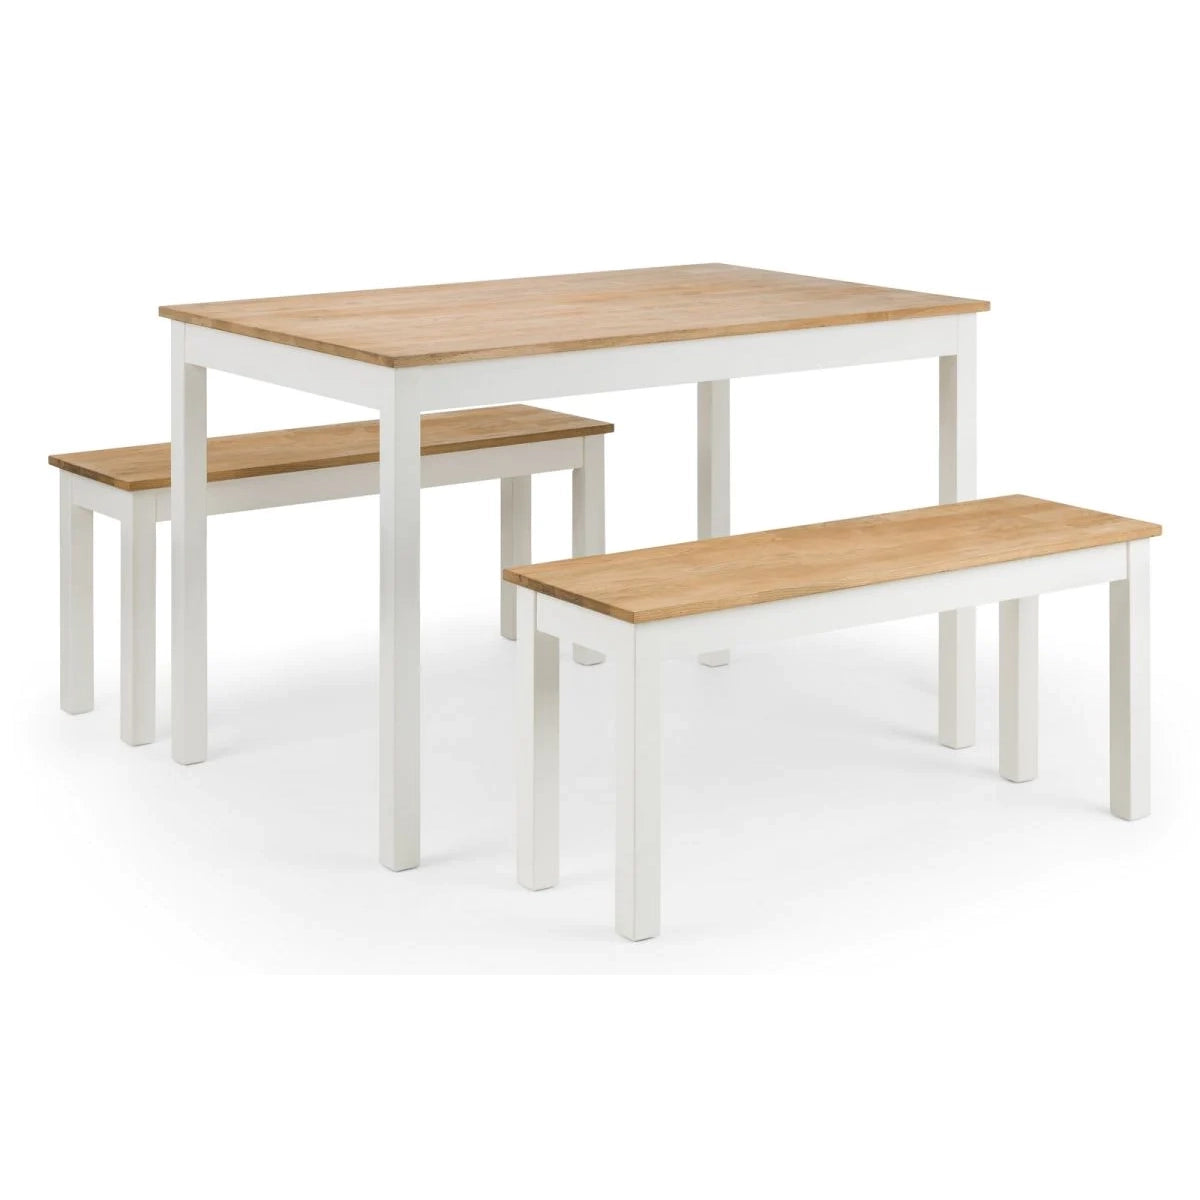 Dining table with 2 benches - WOL10